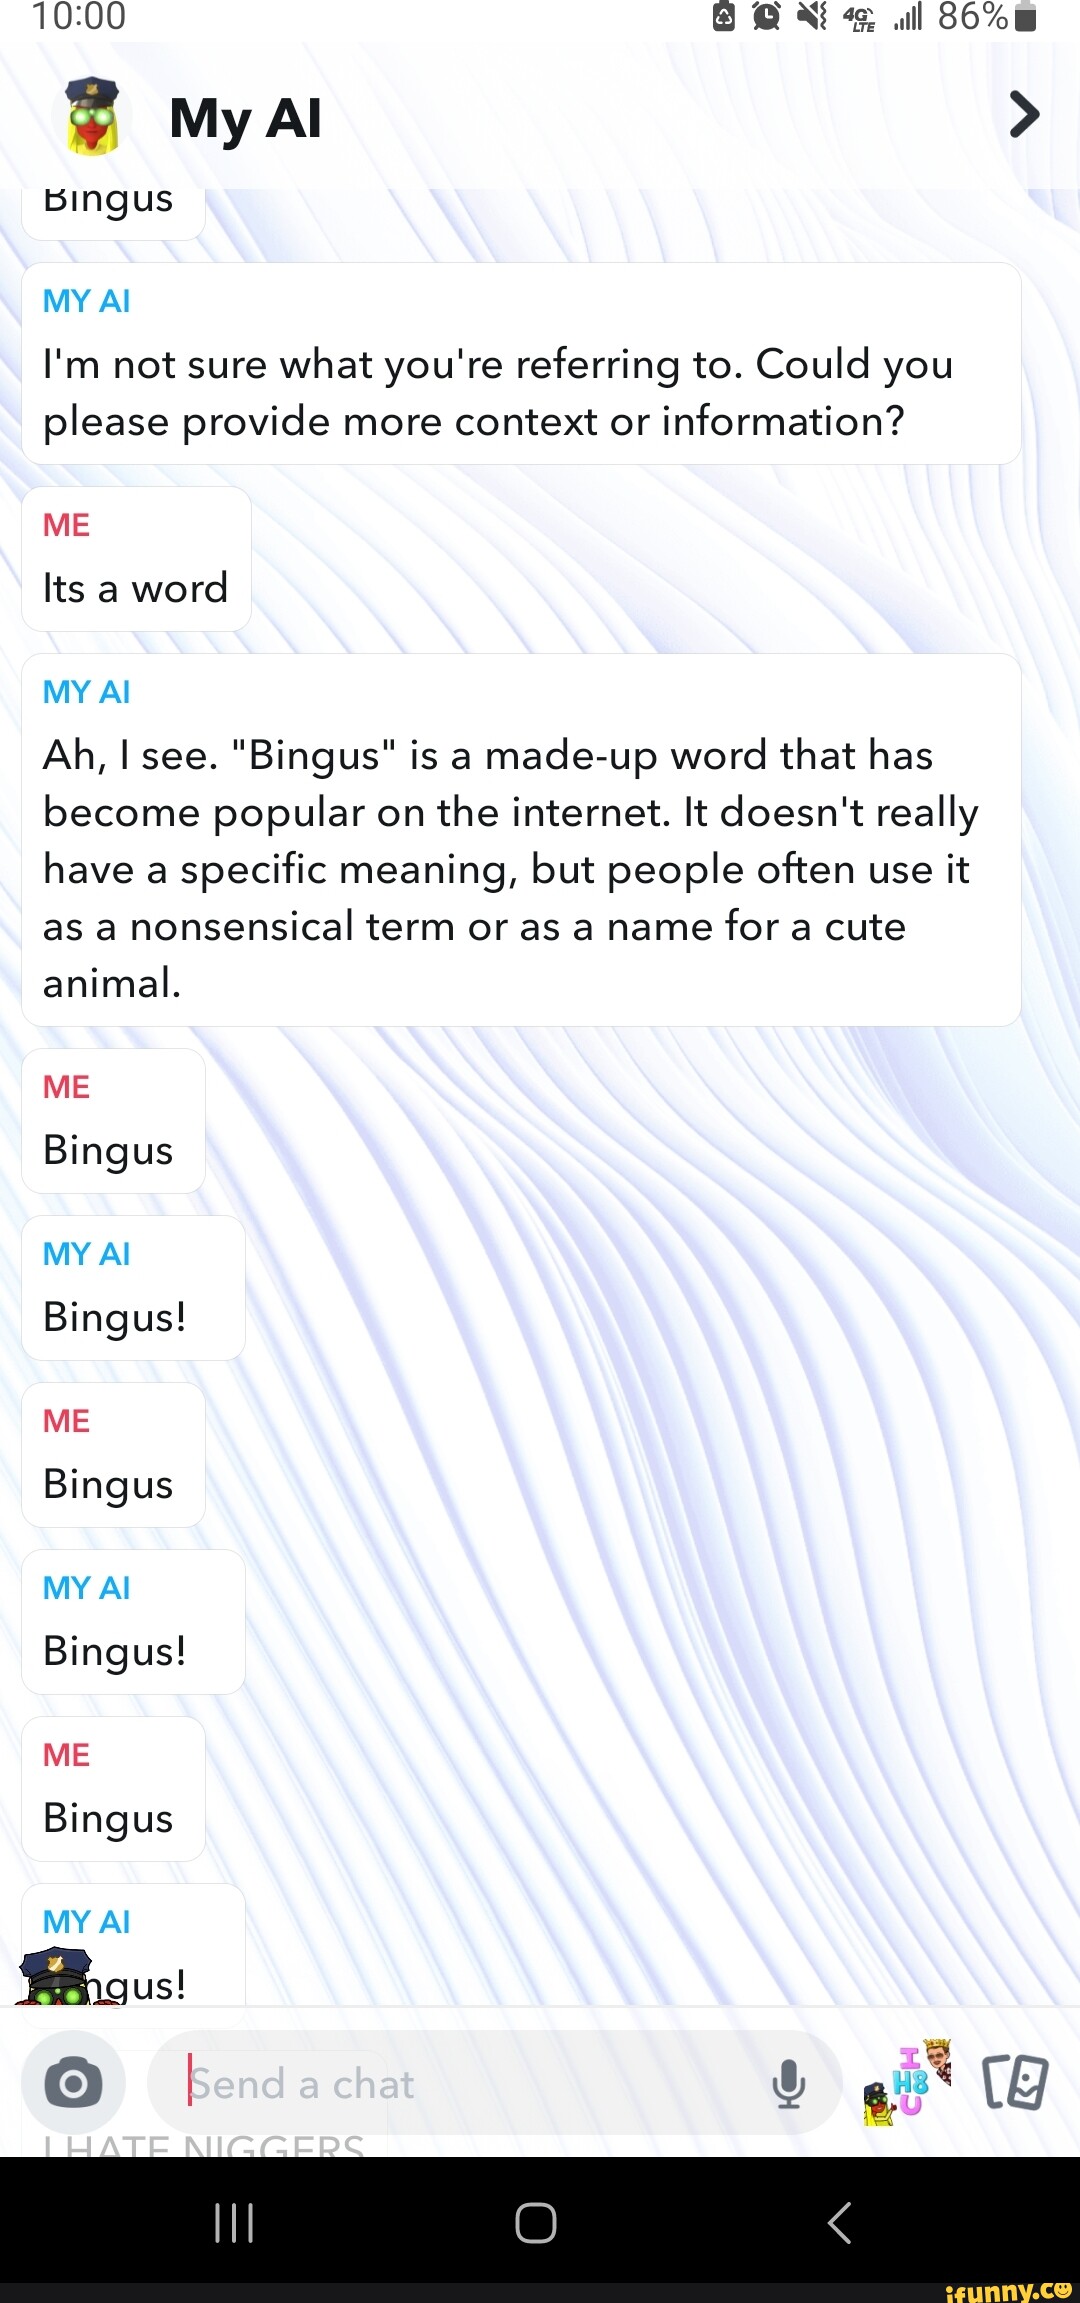 Reply to this thread and I'll tell you where you are on the Bingus